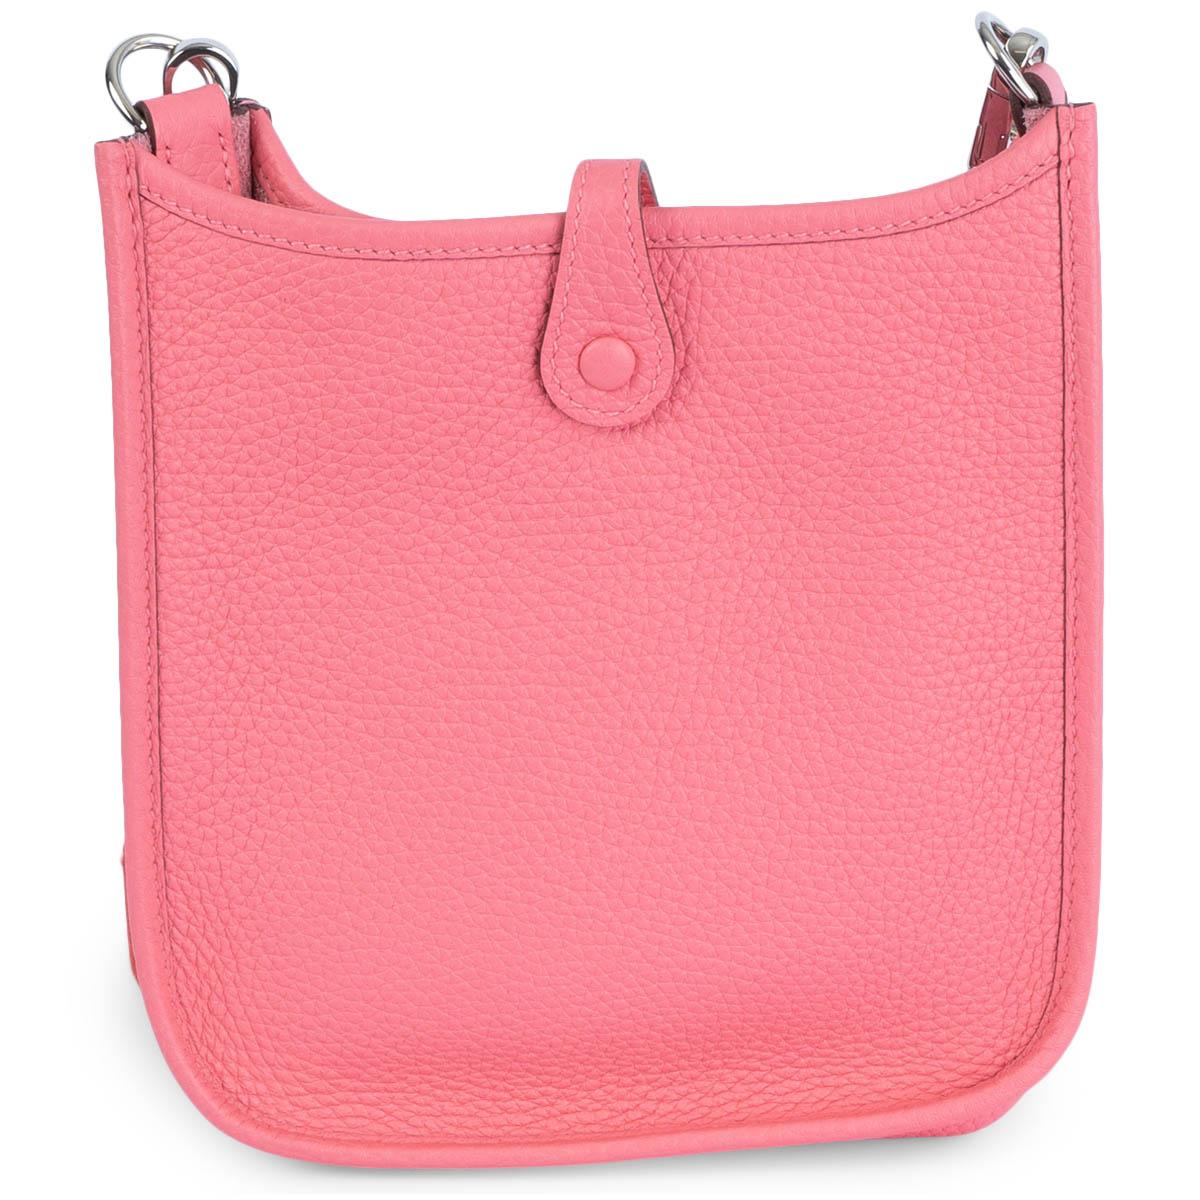 HERMES Azalee pink Clemence leather & Pivoine EVELYNE 16 TPM Crossbody Bag In Excellent Condition For Sale In Zürich, CH